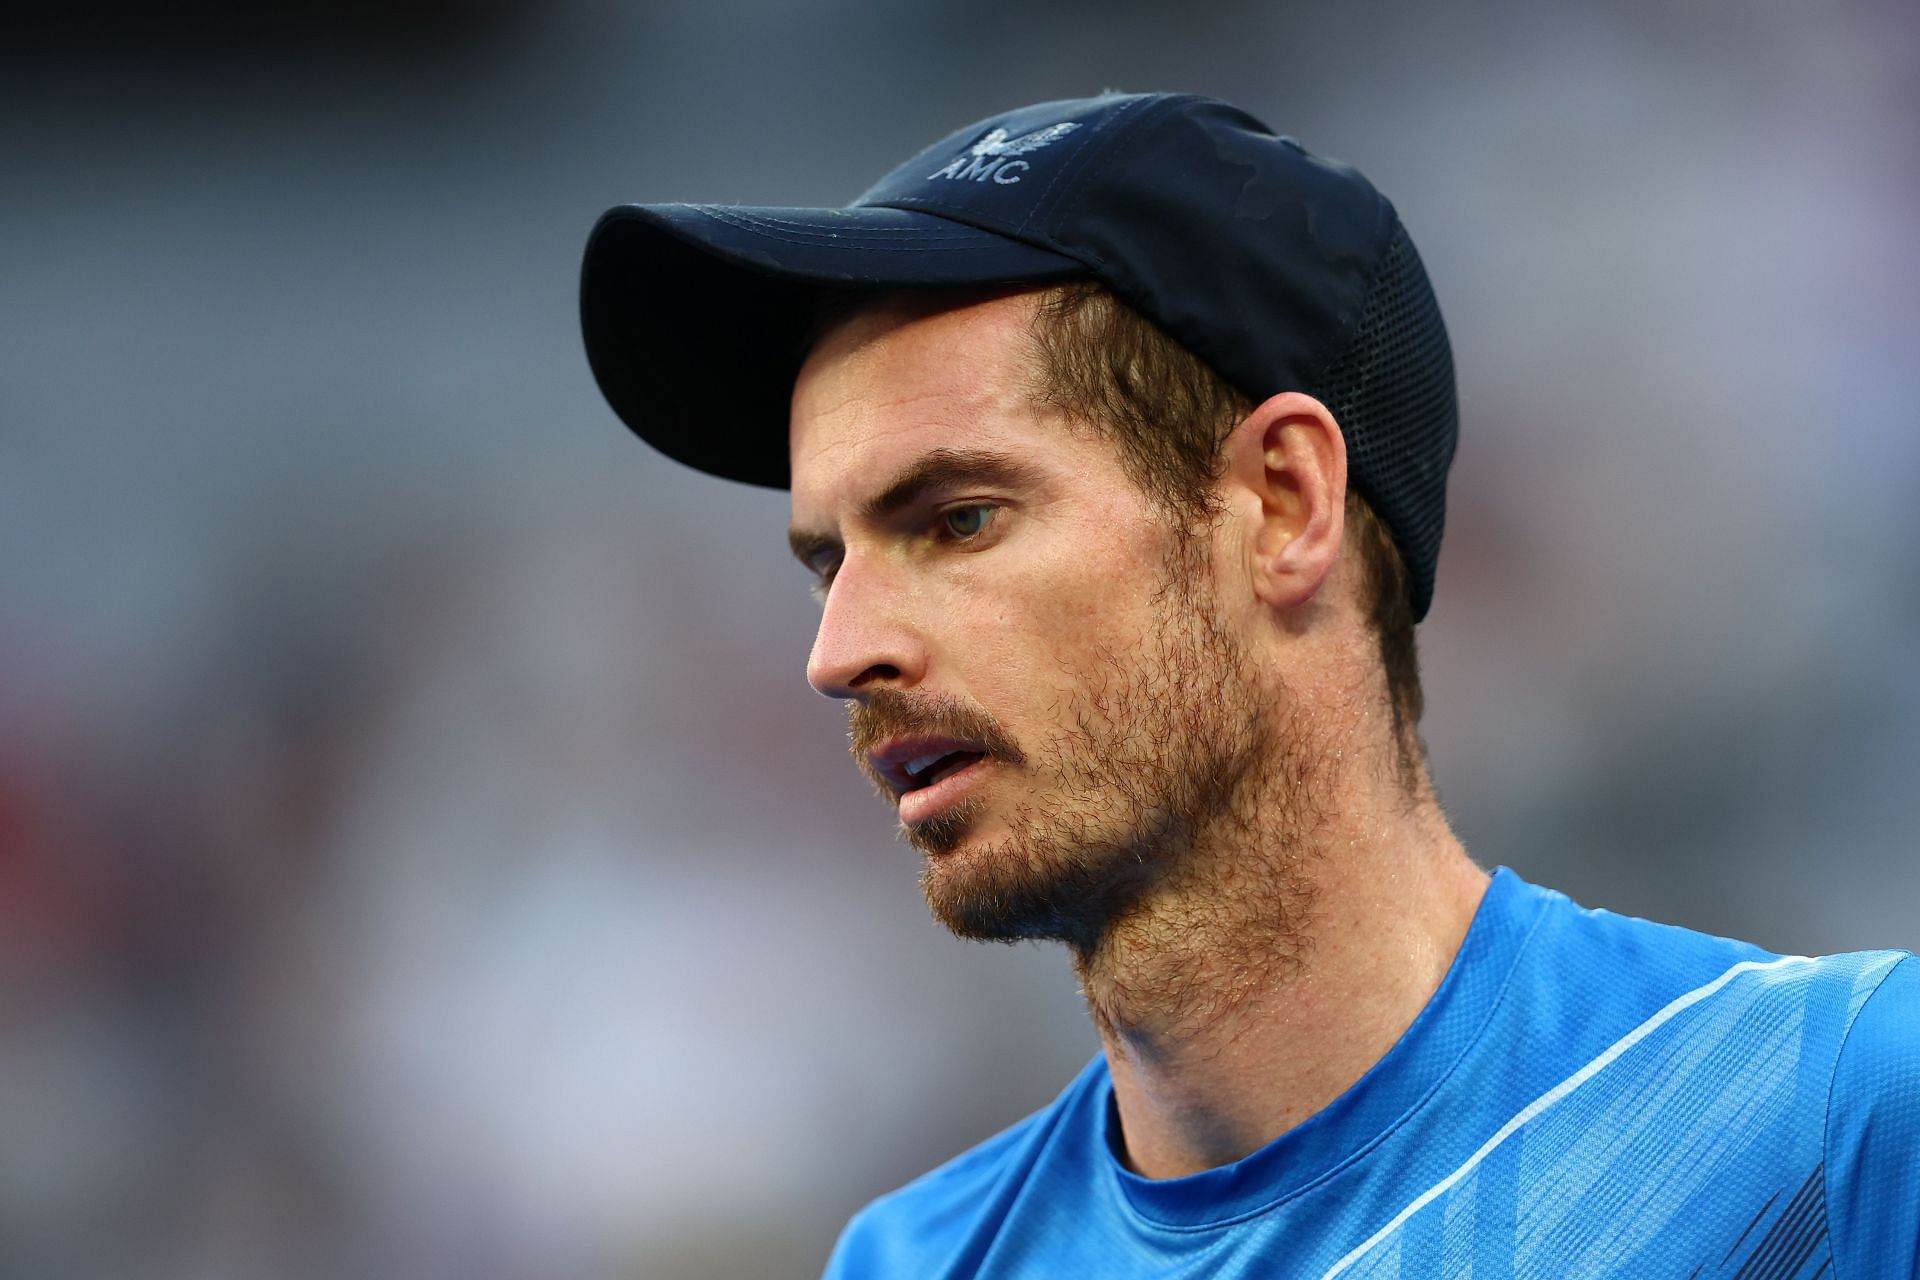 Andy Murray will move back into the top 90 of the ATP rankings for the first time since 2018